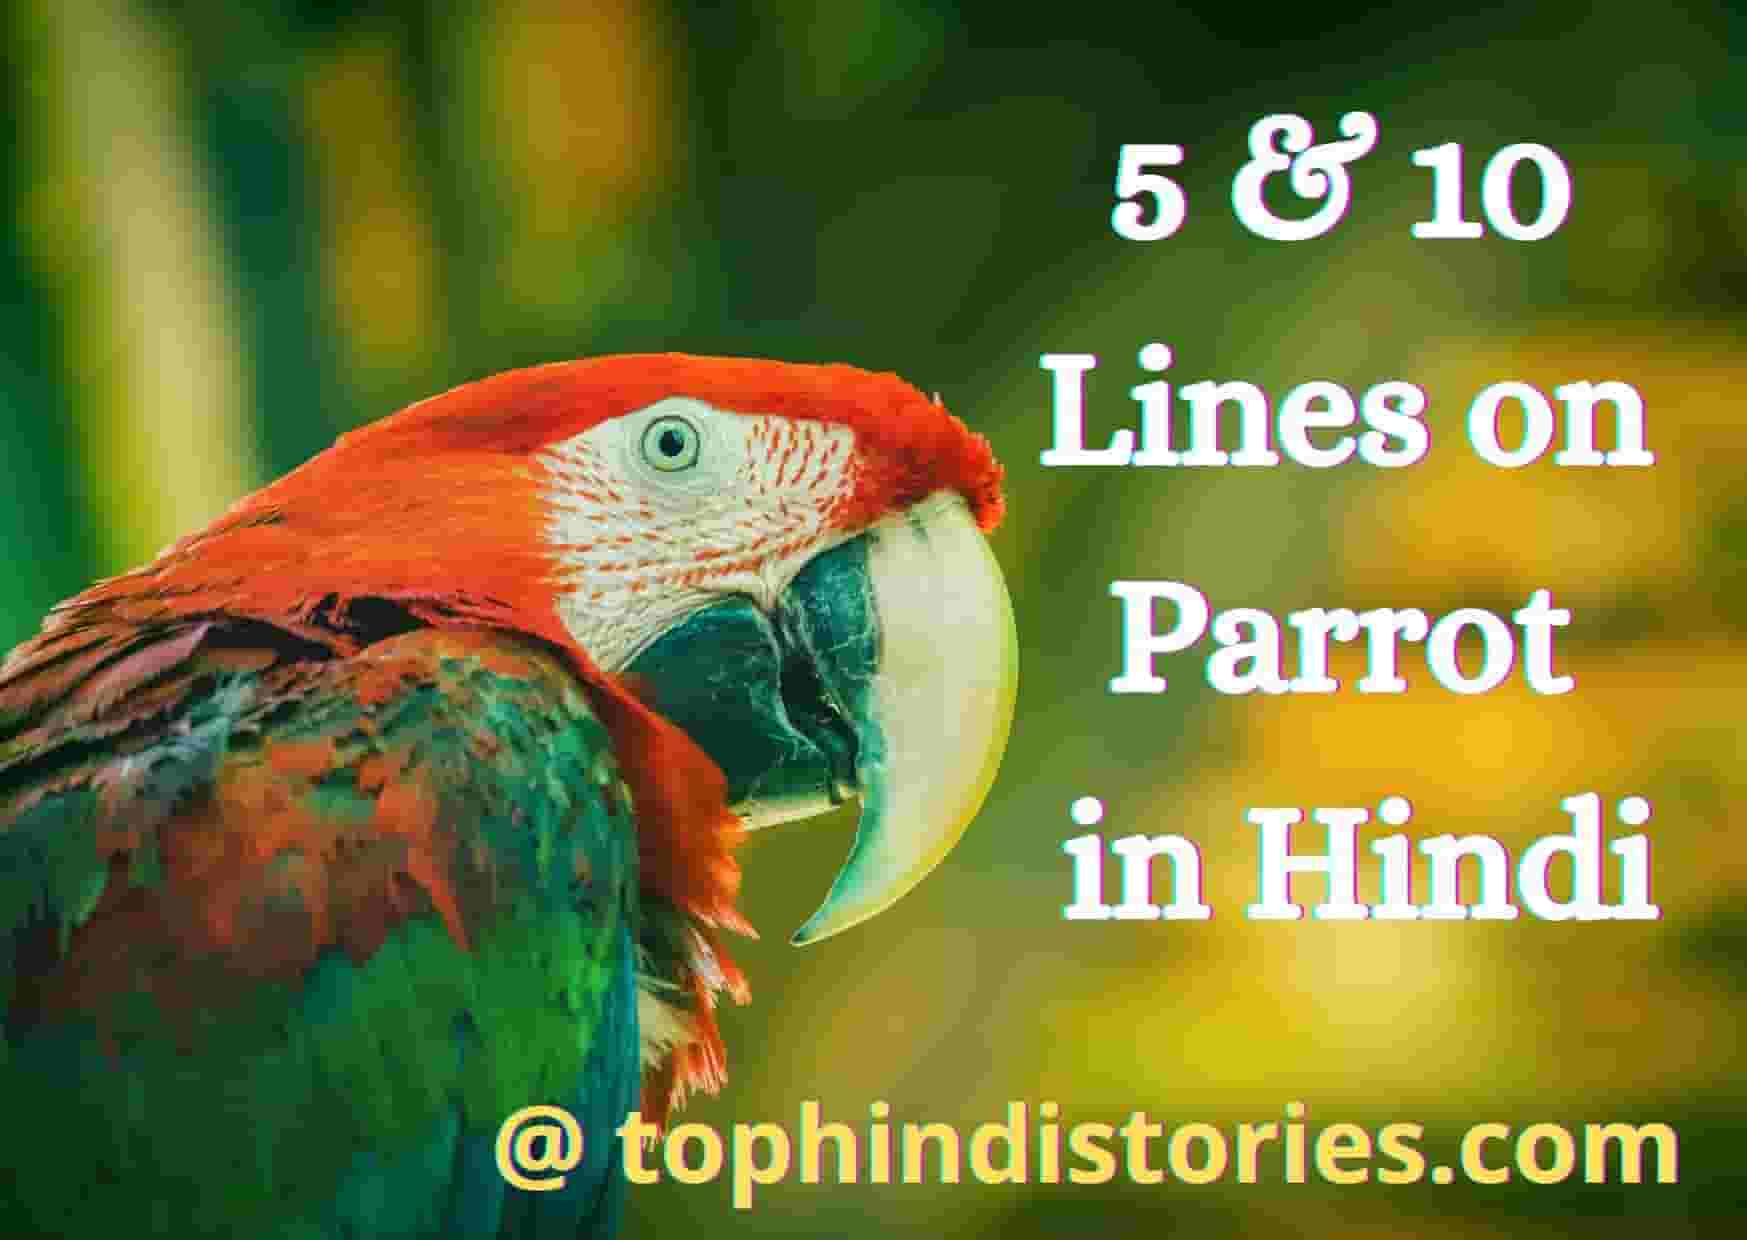 5 & 10 lines on parrot in Hindi